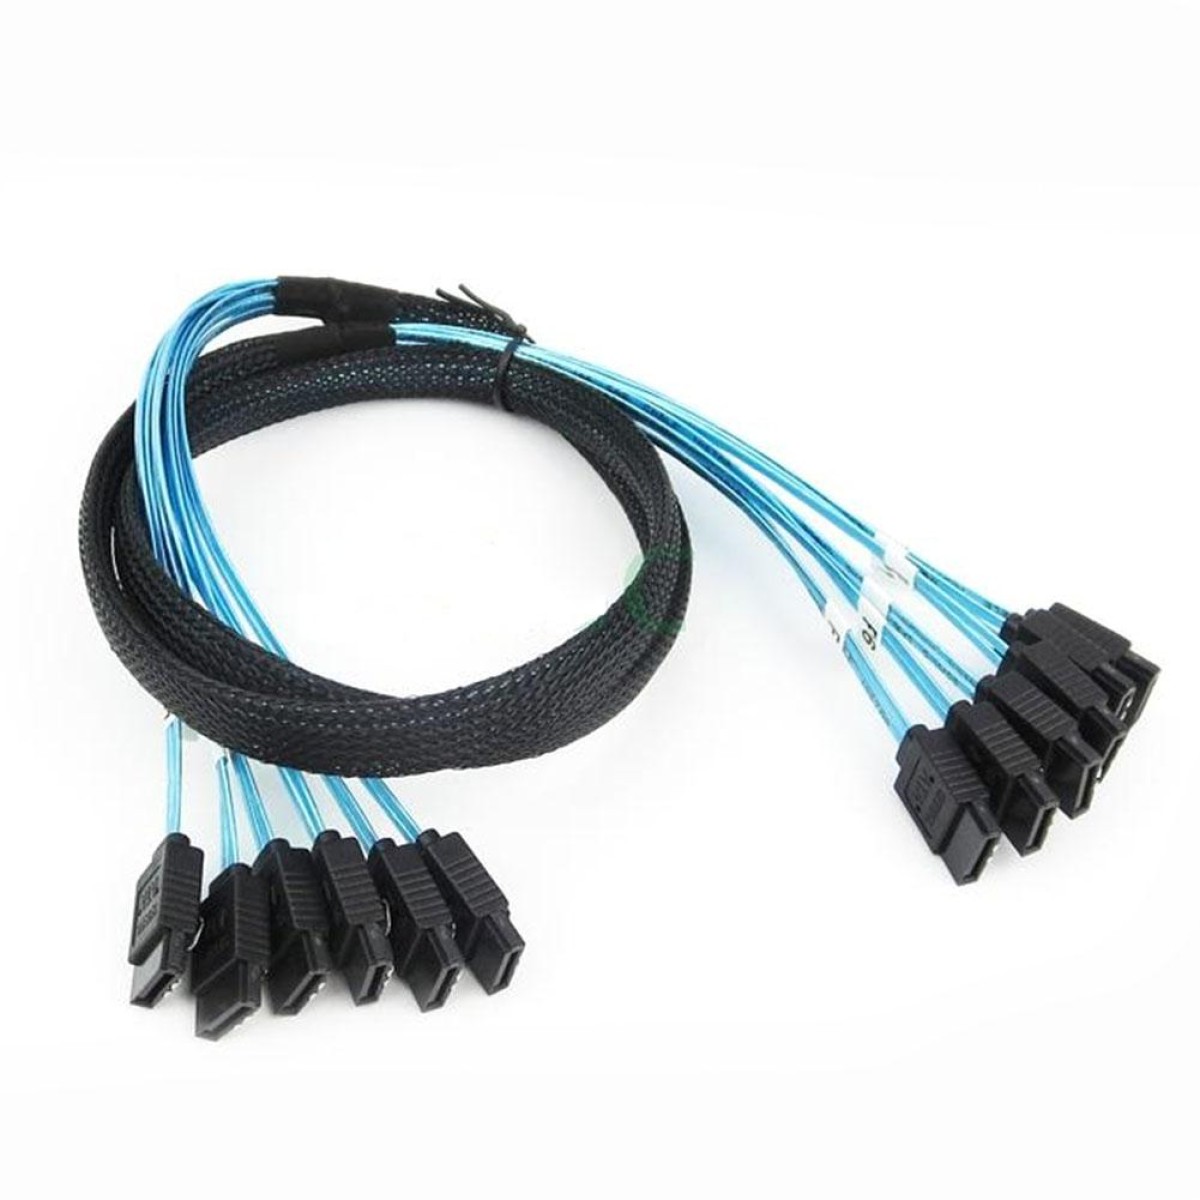 Mini SAS to SATA Data Cable With Braided Net Computer Case Hard Drive Cable,specification: 6SATA-0.5m